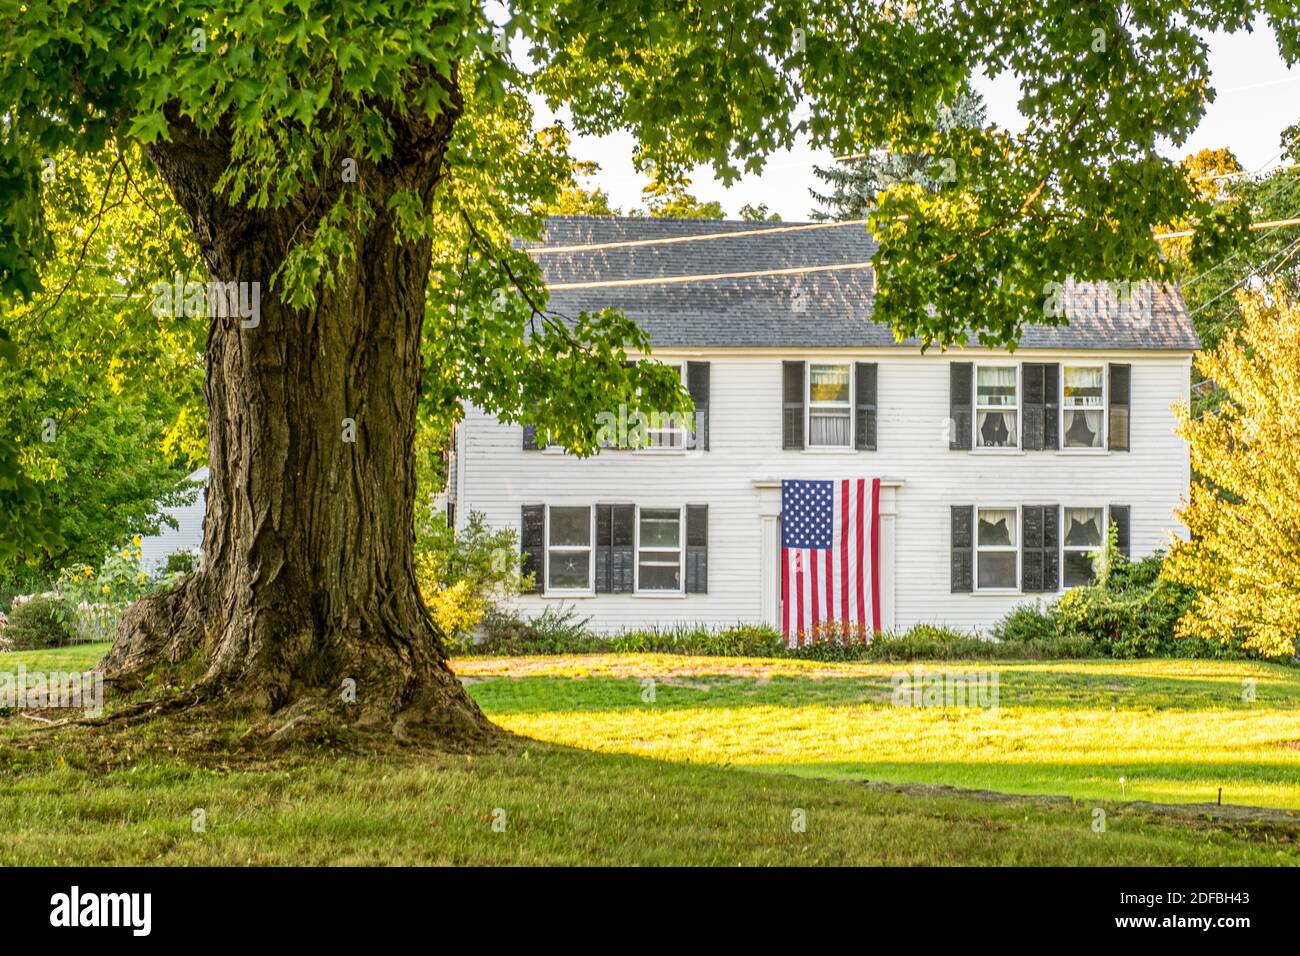 A large American Flag hangs over the front door of this colonial style home in Phillipston, Massachusetts Stock Photo